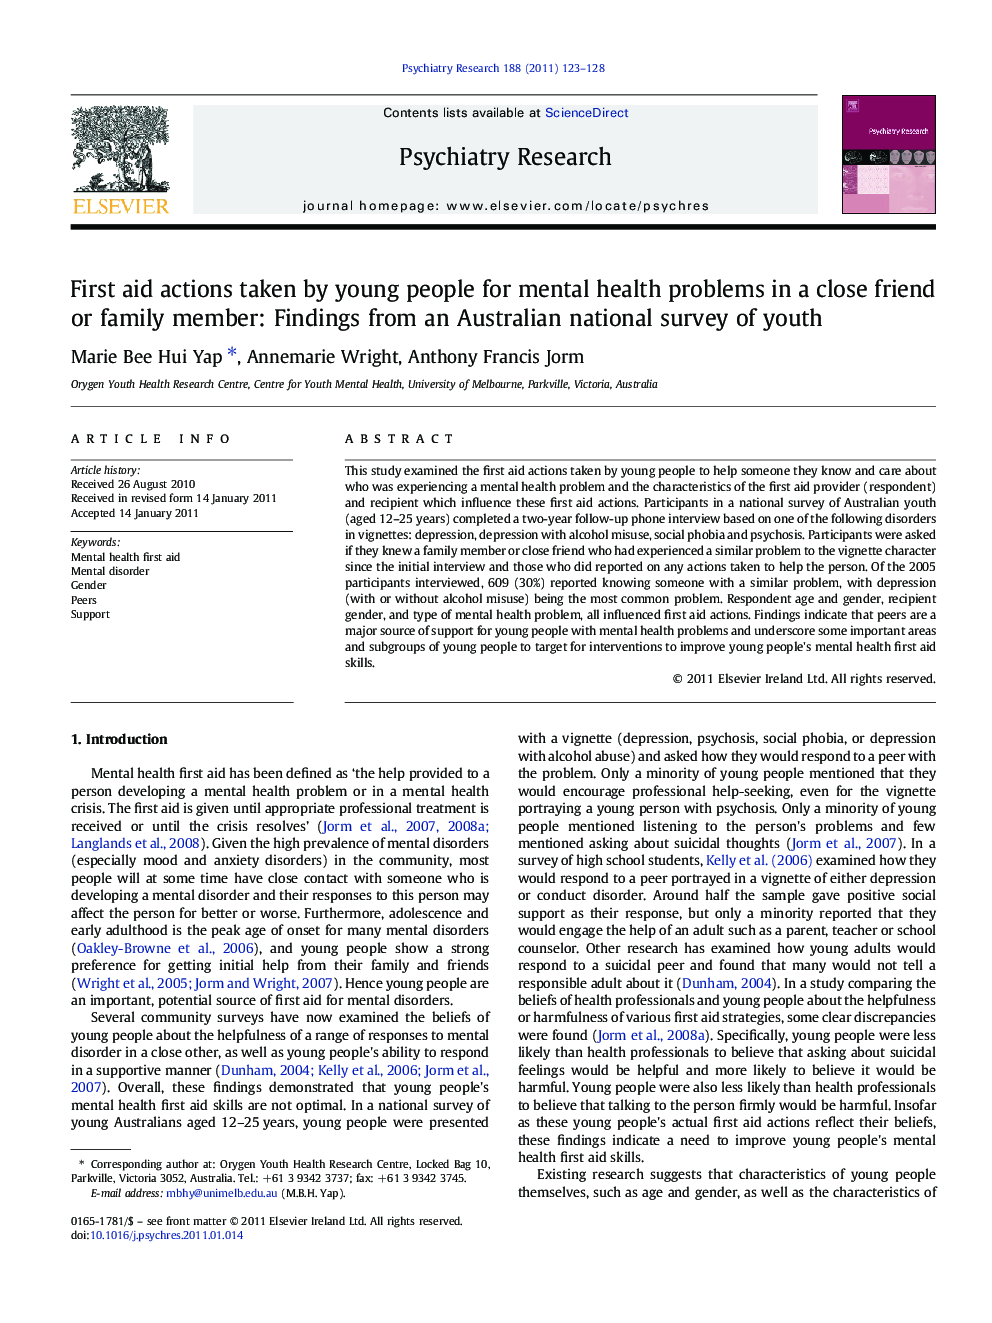 First aid actions taken by young people for mental health problems in a close friend or family member: Findings from an Australian national survey of youth